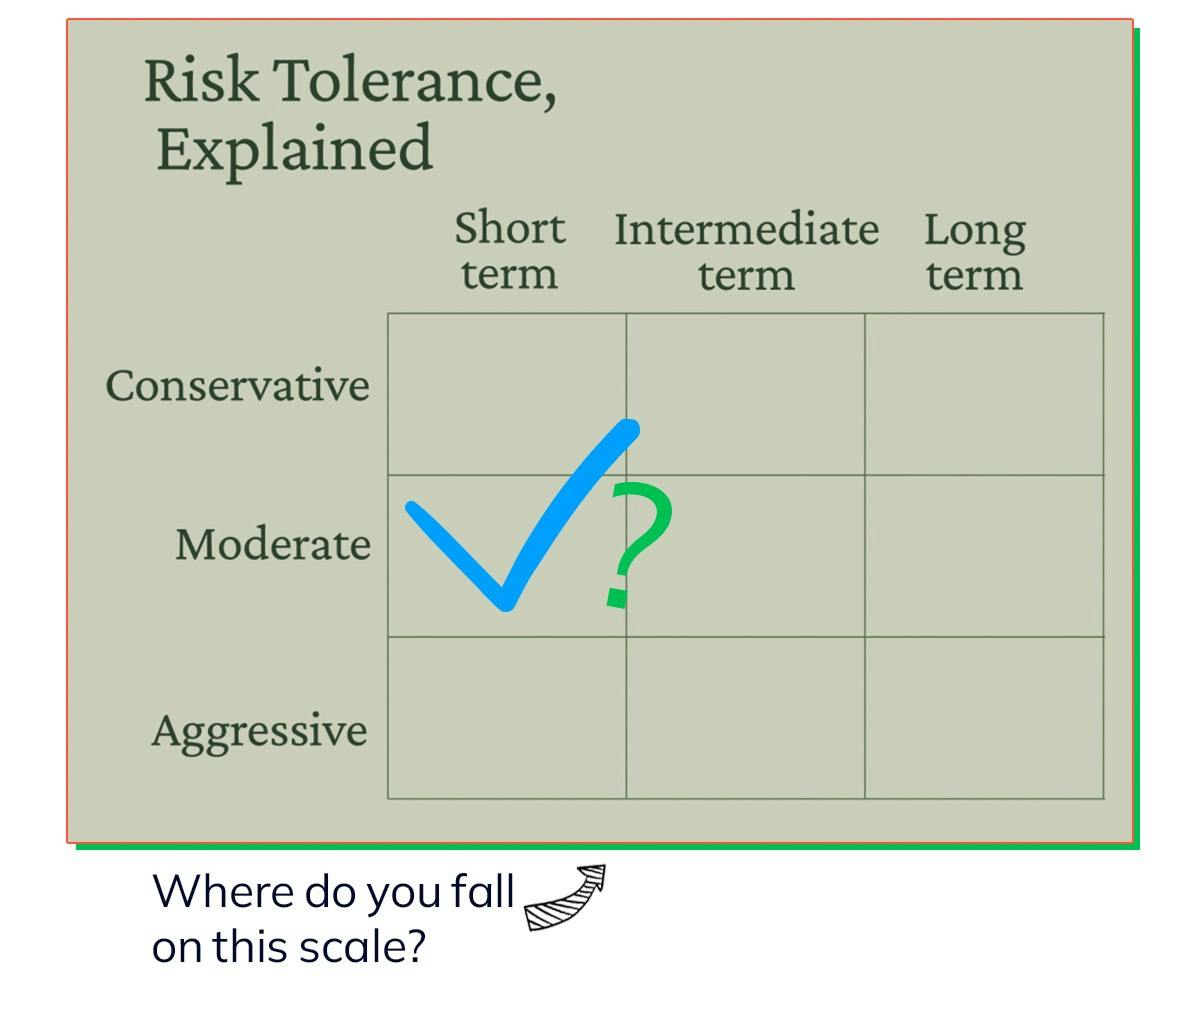 Find out where you fall on the grid of risk tolerance: conservative / moderate / aggressive, and short-term / intermediate-term / long-term. 